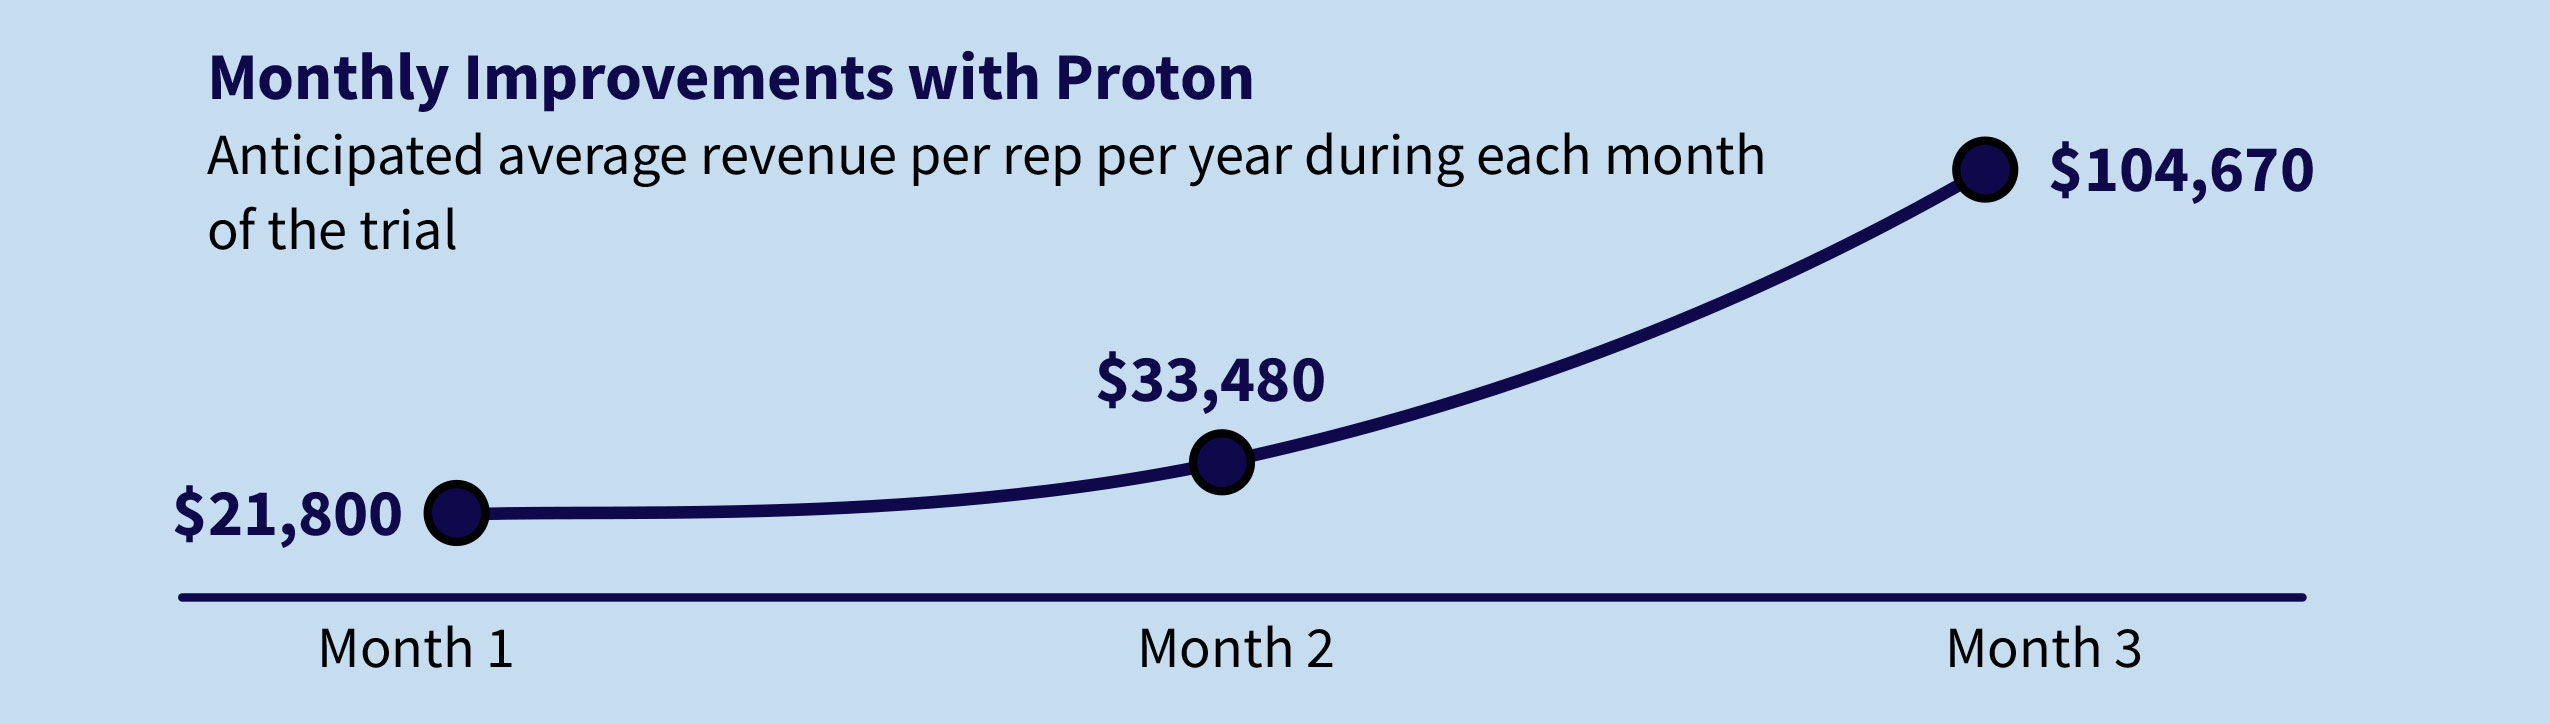 Monthly-Improvements-with-Proton.jpg